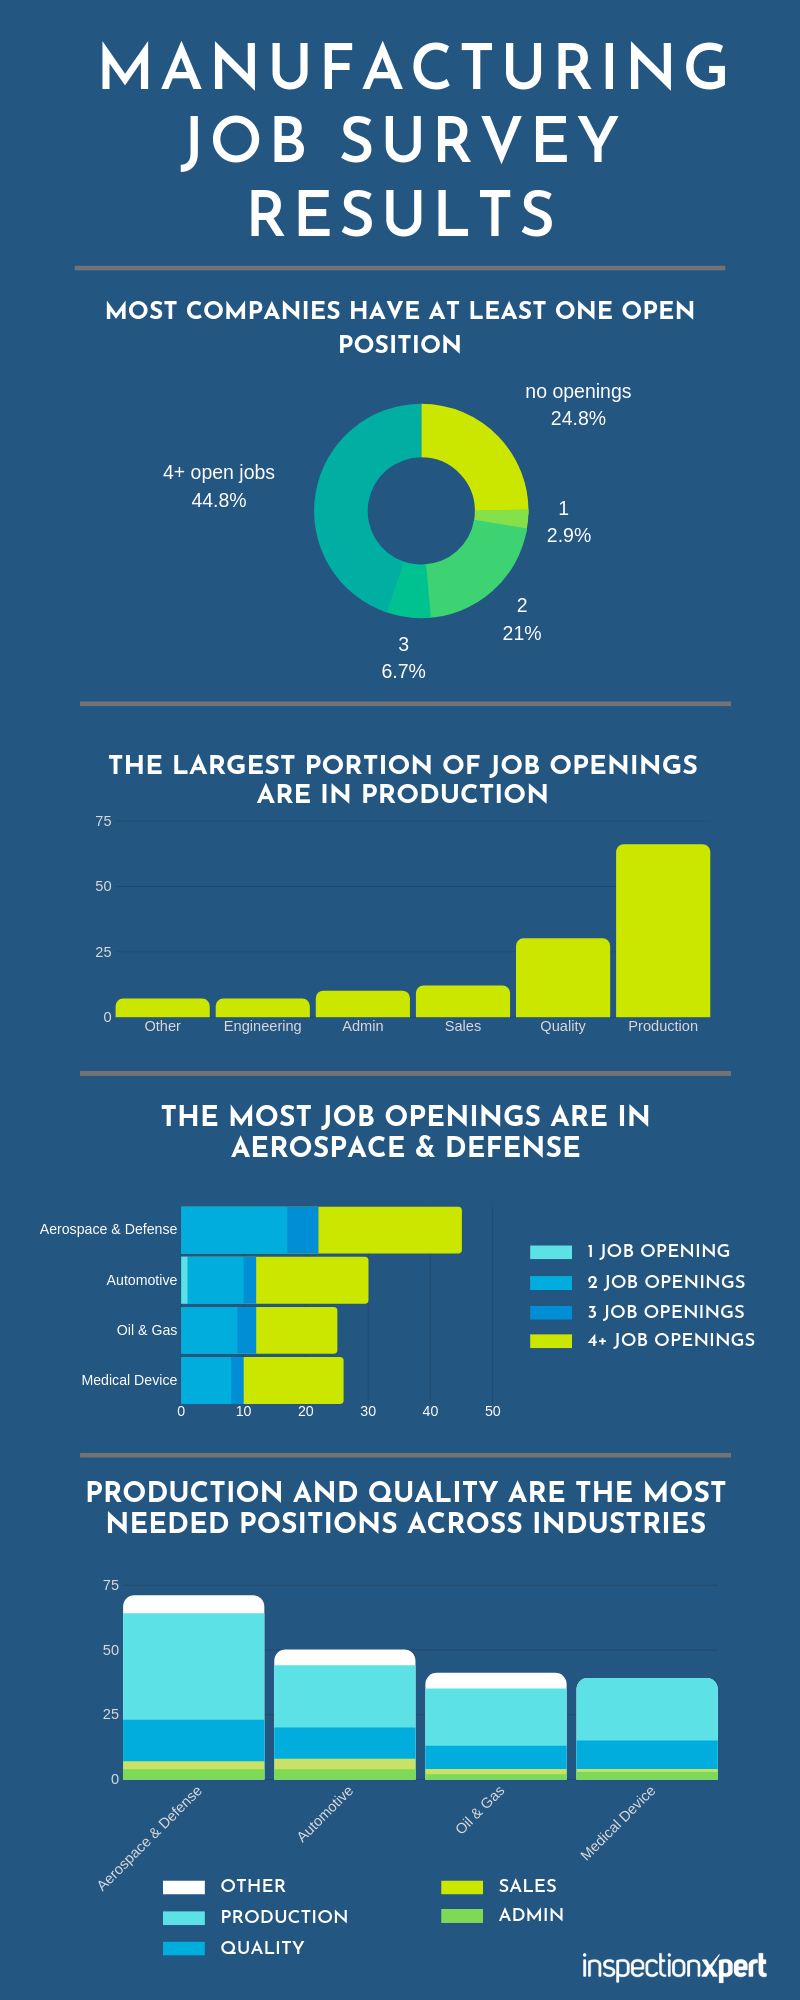 Job Survey Results - most companies have at least one open position, the largest portion of job openings are in production in Aerospace and Defense